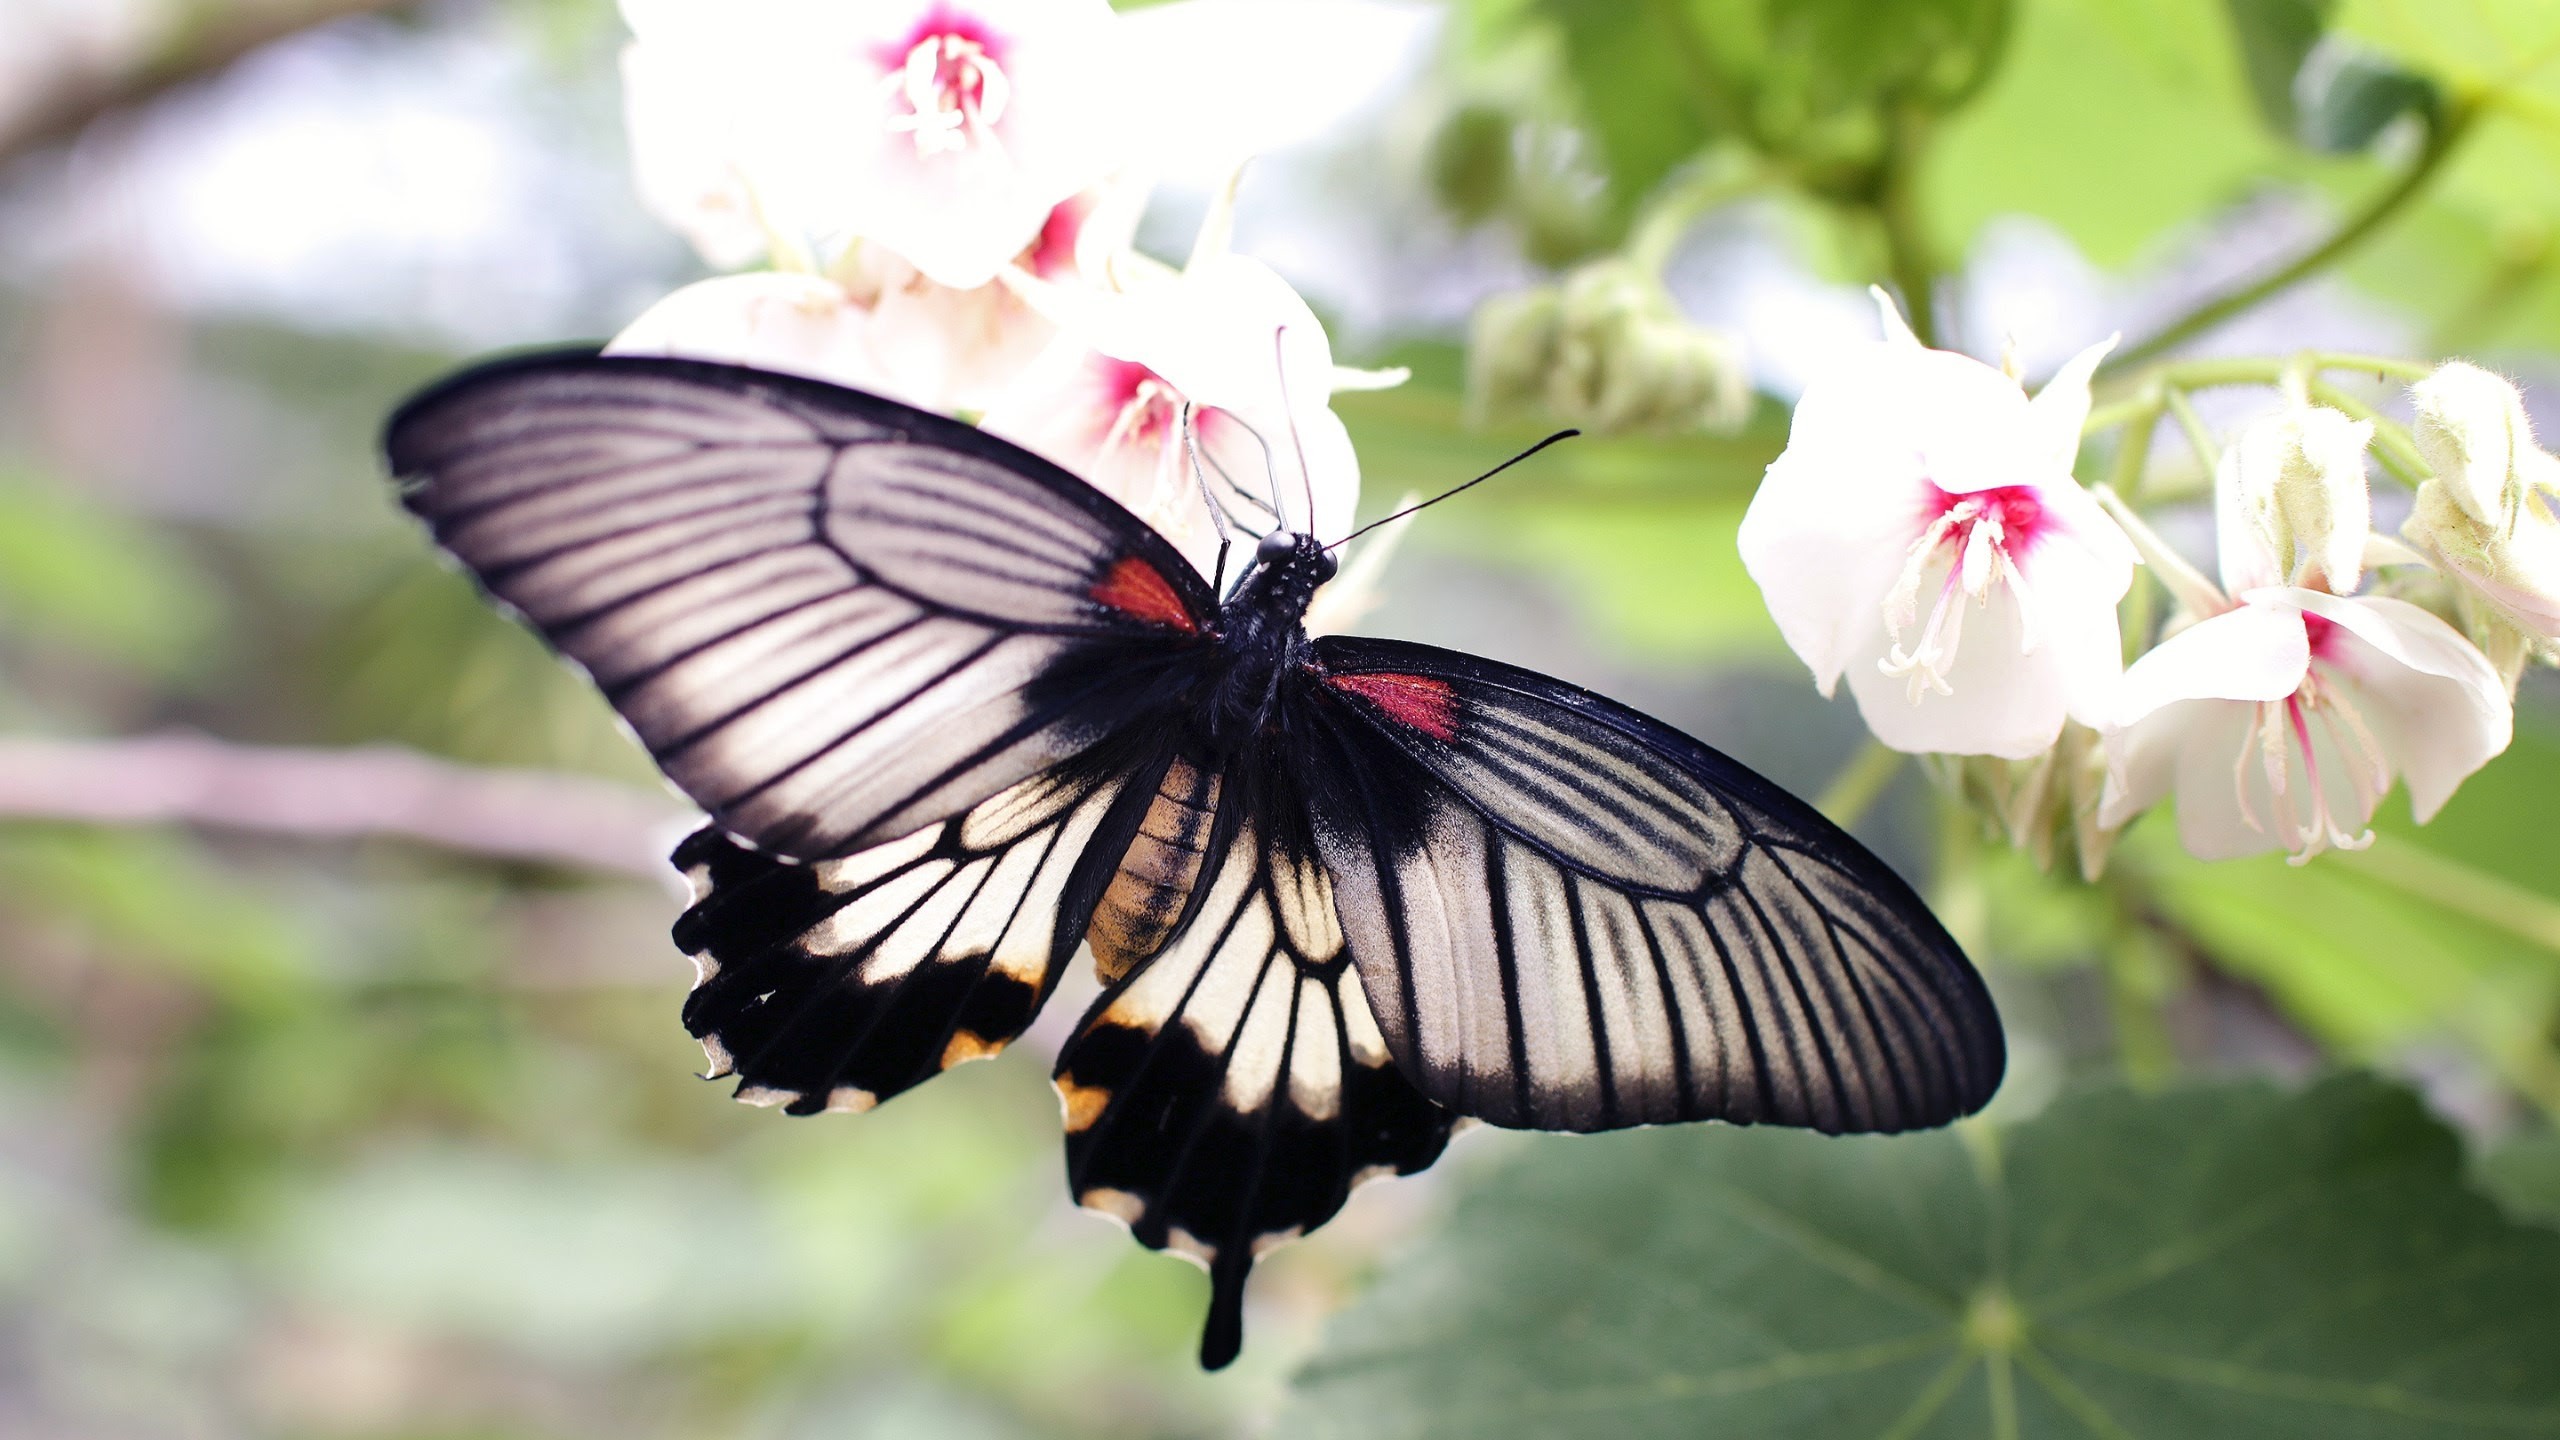 2560x1440 New HD wallpaper with marvelous Black Butterfly on White Flowers Â· Download  the free picture from links listed below at 2K, HD and Wide sizes for apply  in ...